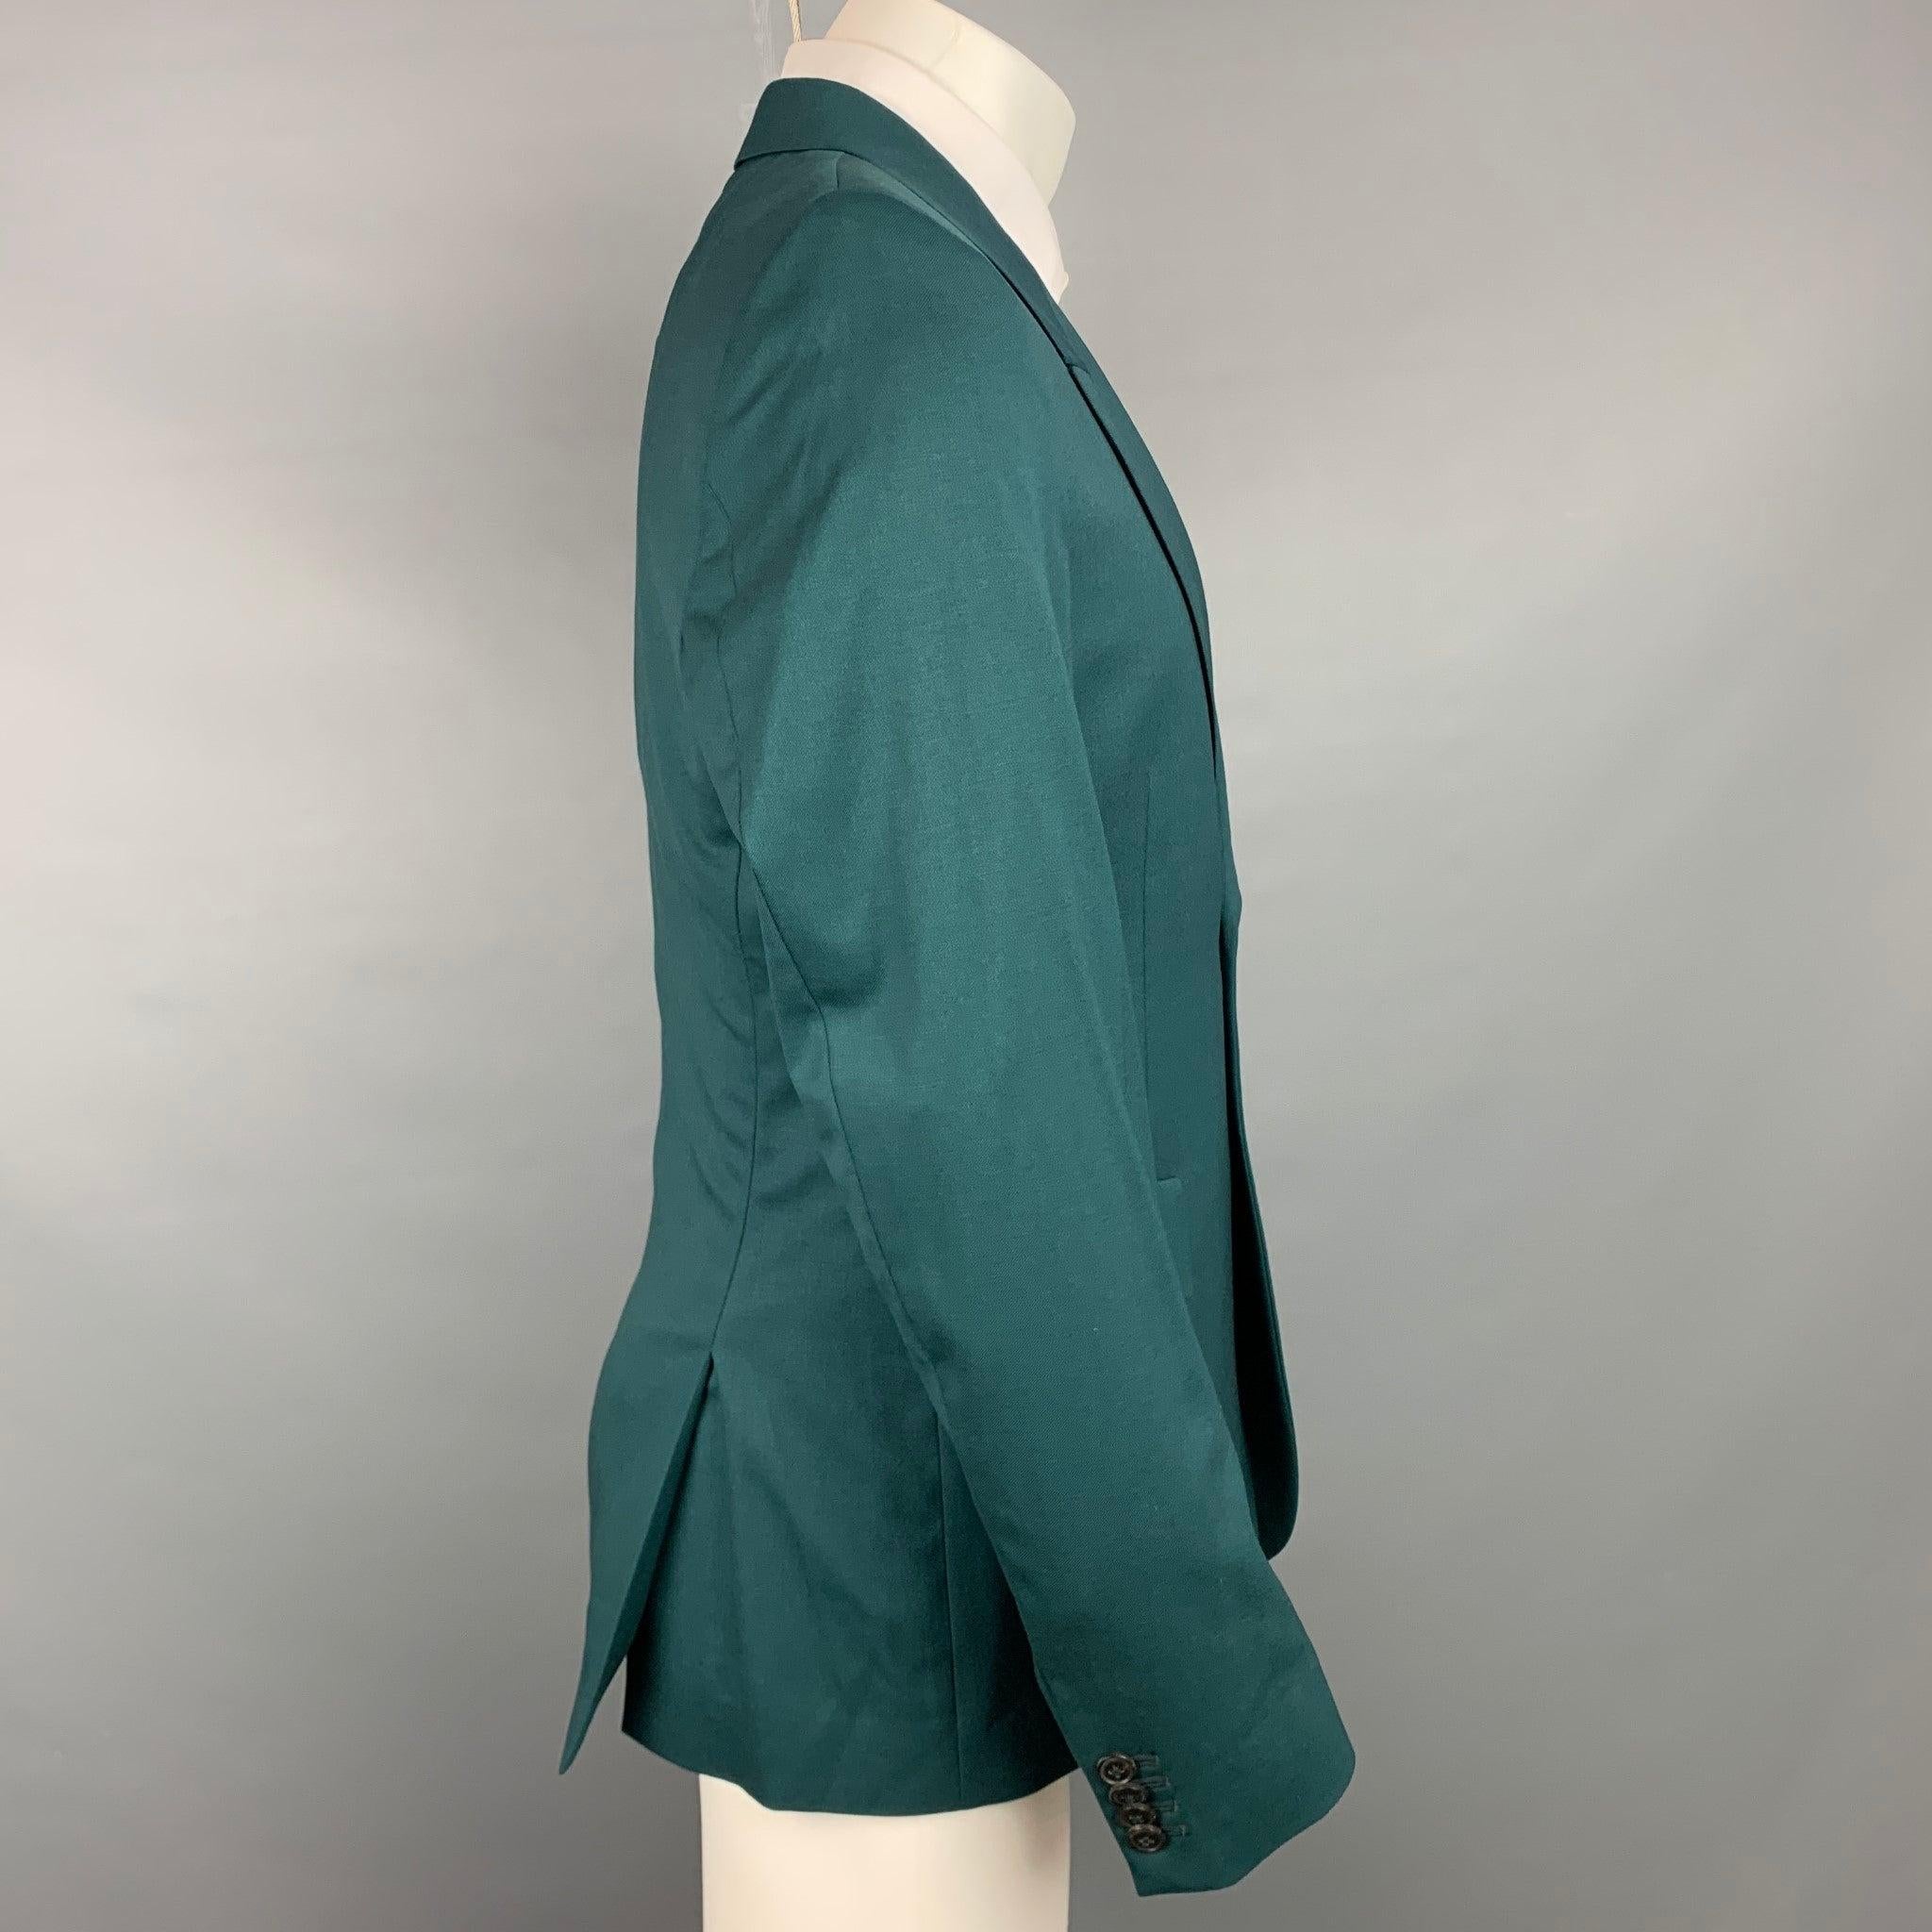 PAUL SMITH Size 42 Green Wool Notch Lapel Sport Coat In Good Condition For Sale In San Francisco, CA